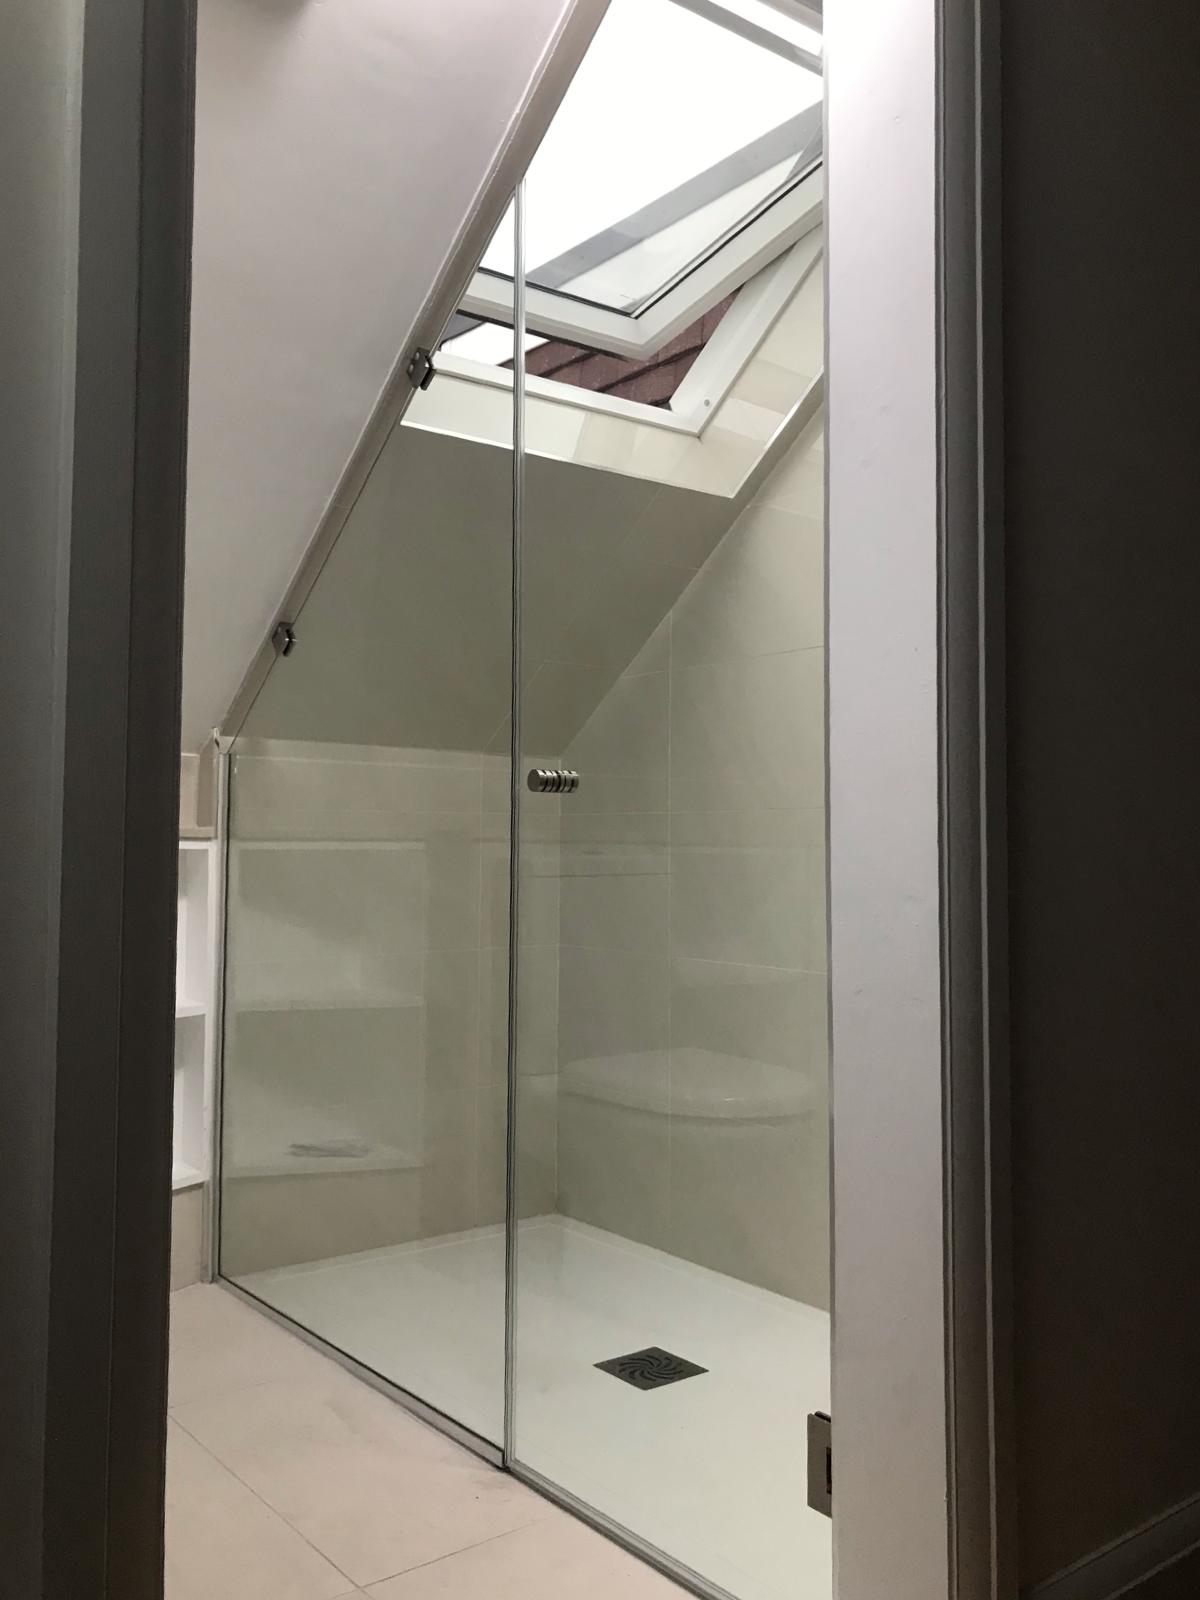 Glass shower enclosure in the attic room